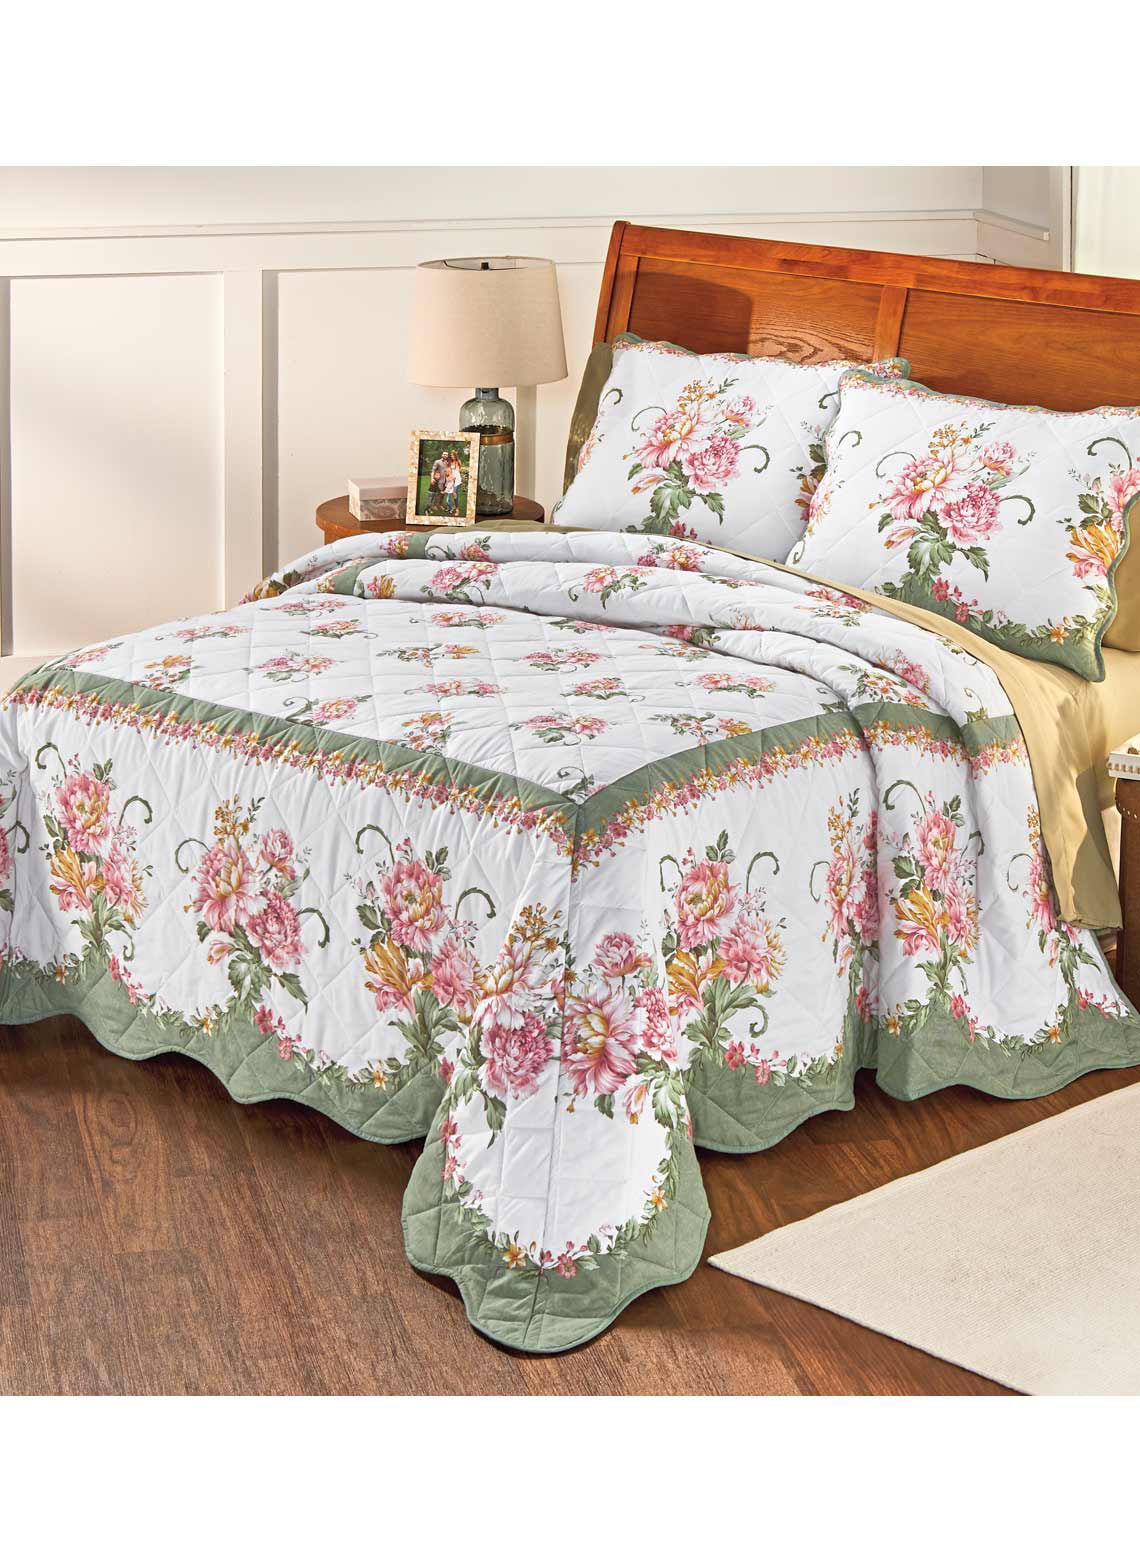 Magnolia Bedding Melissa Quilted Bedspread Splendid with Diamond-stitching Quilt 